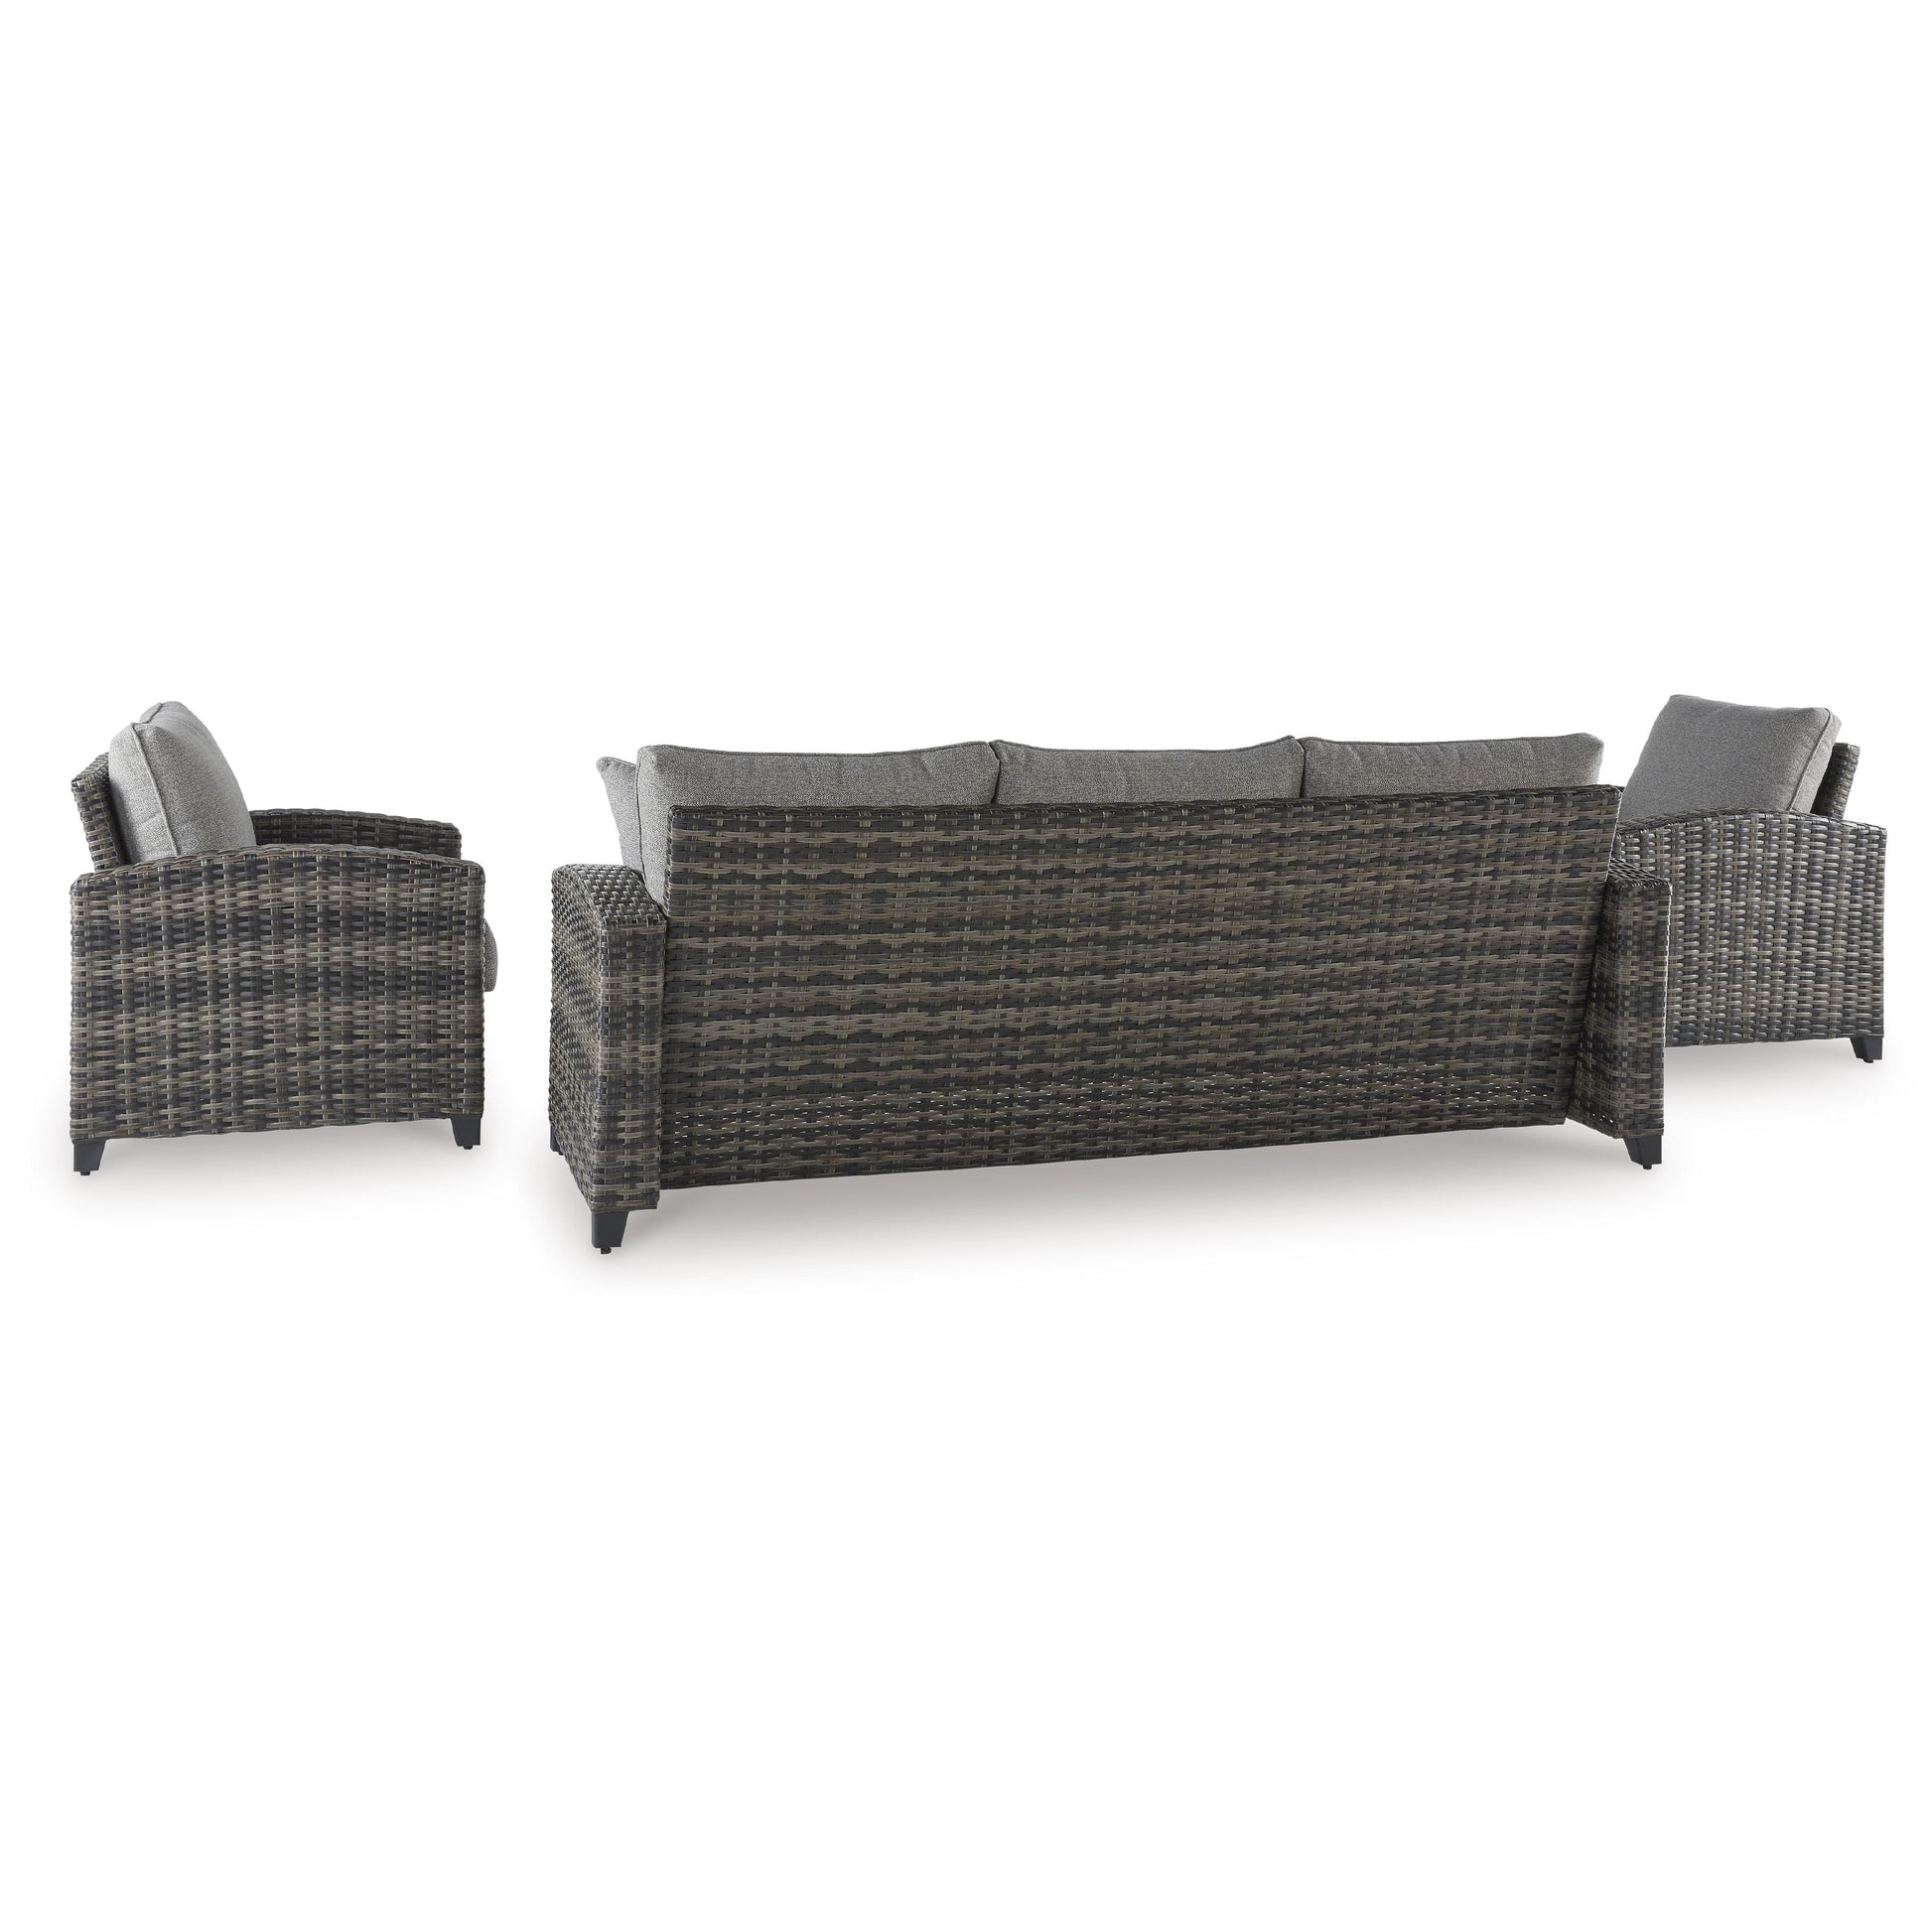 Signature Design by Ashley Outdoor Seating Sets P335-081 IMAGE 3